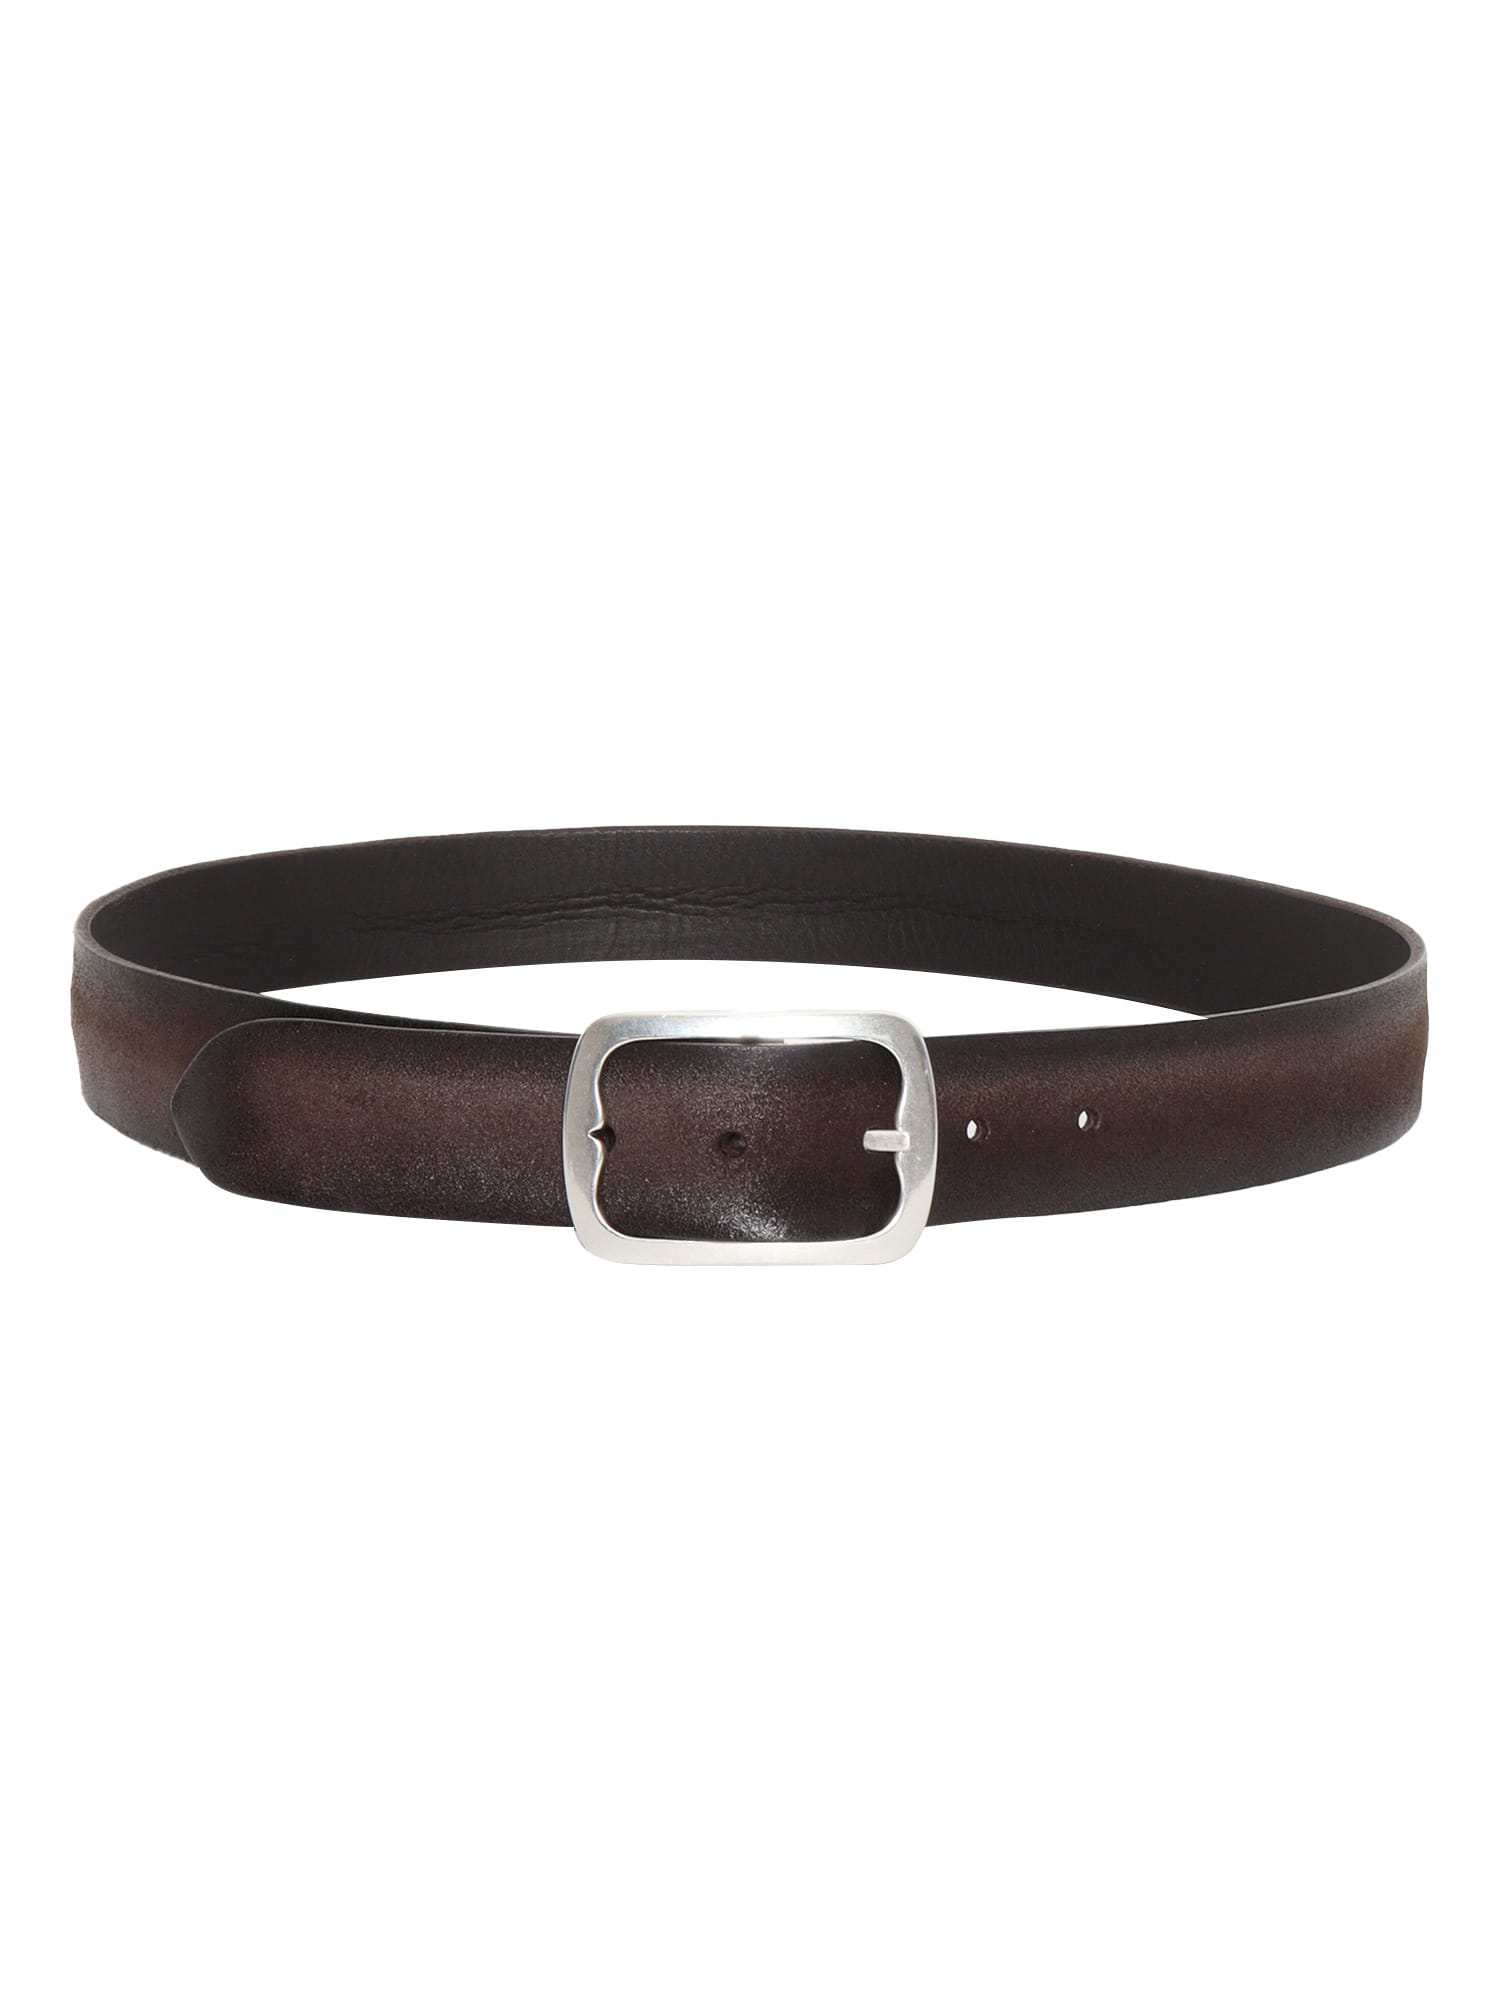 ORCIANI HUNTING DOUBLE REVERSIBLE BELT